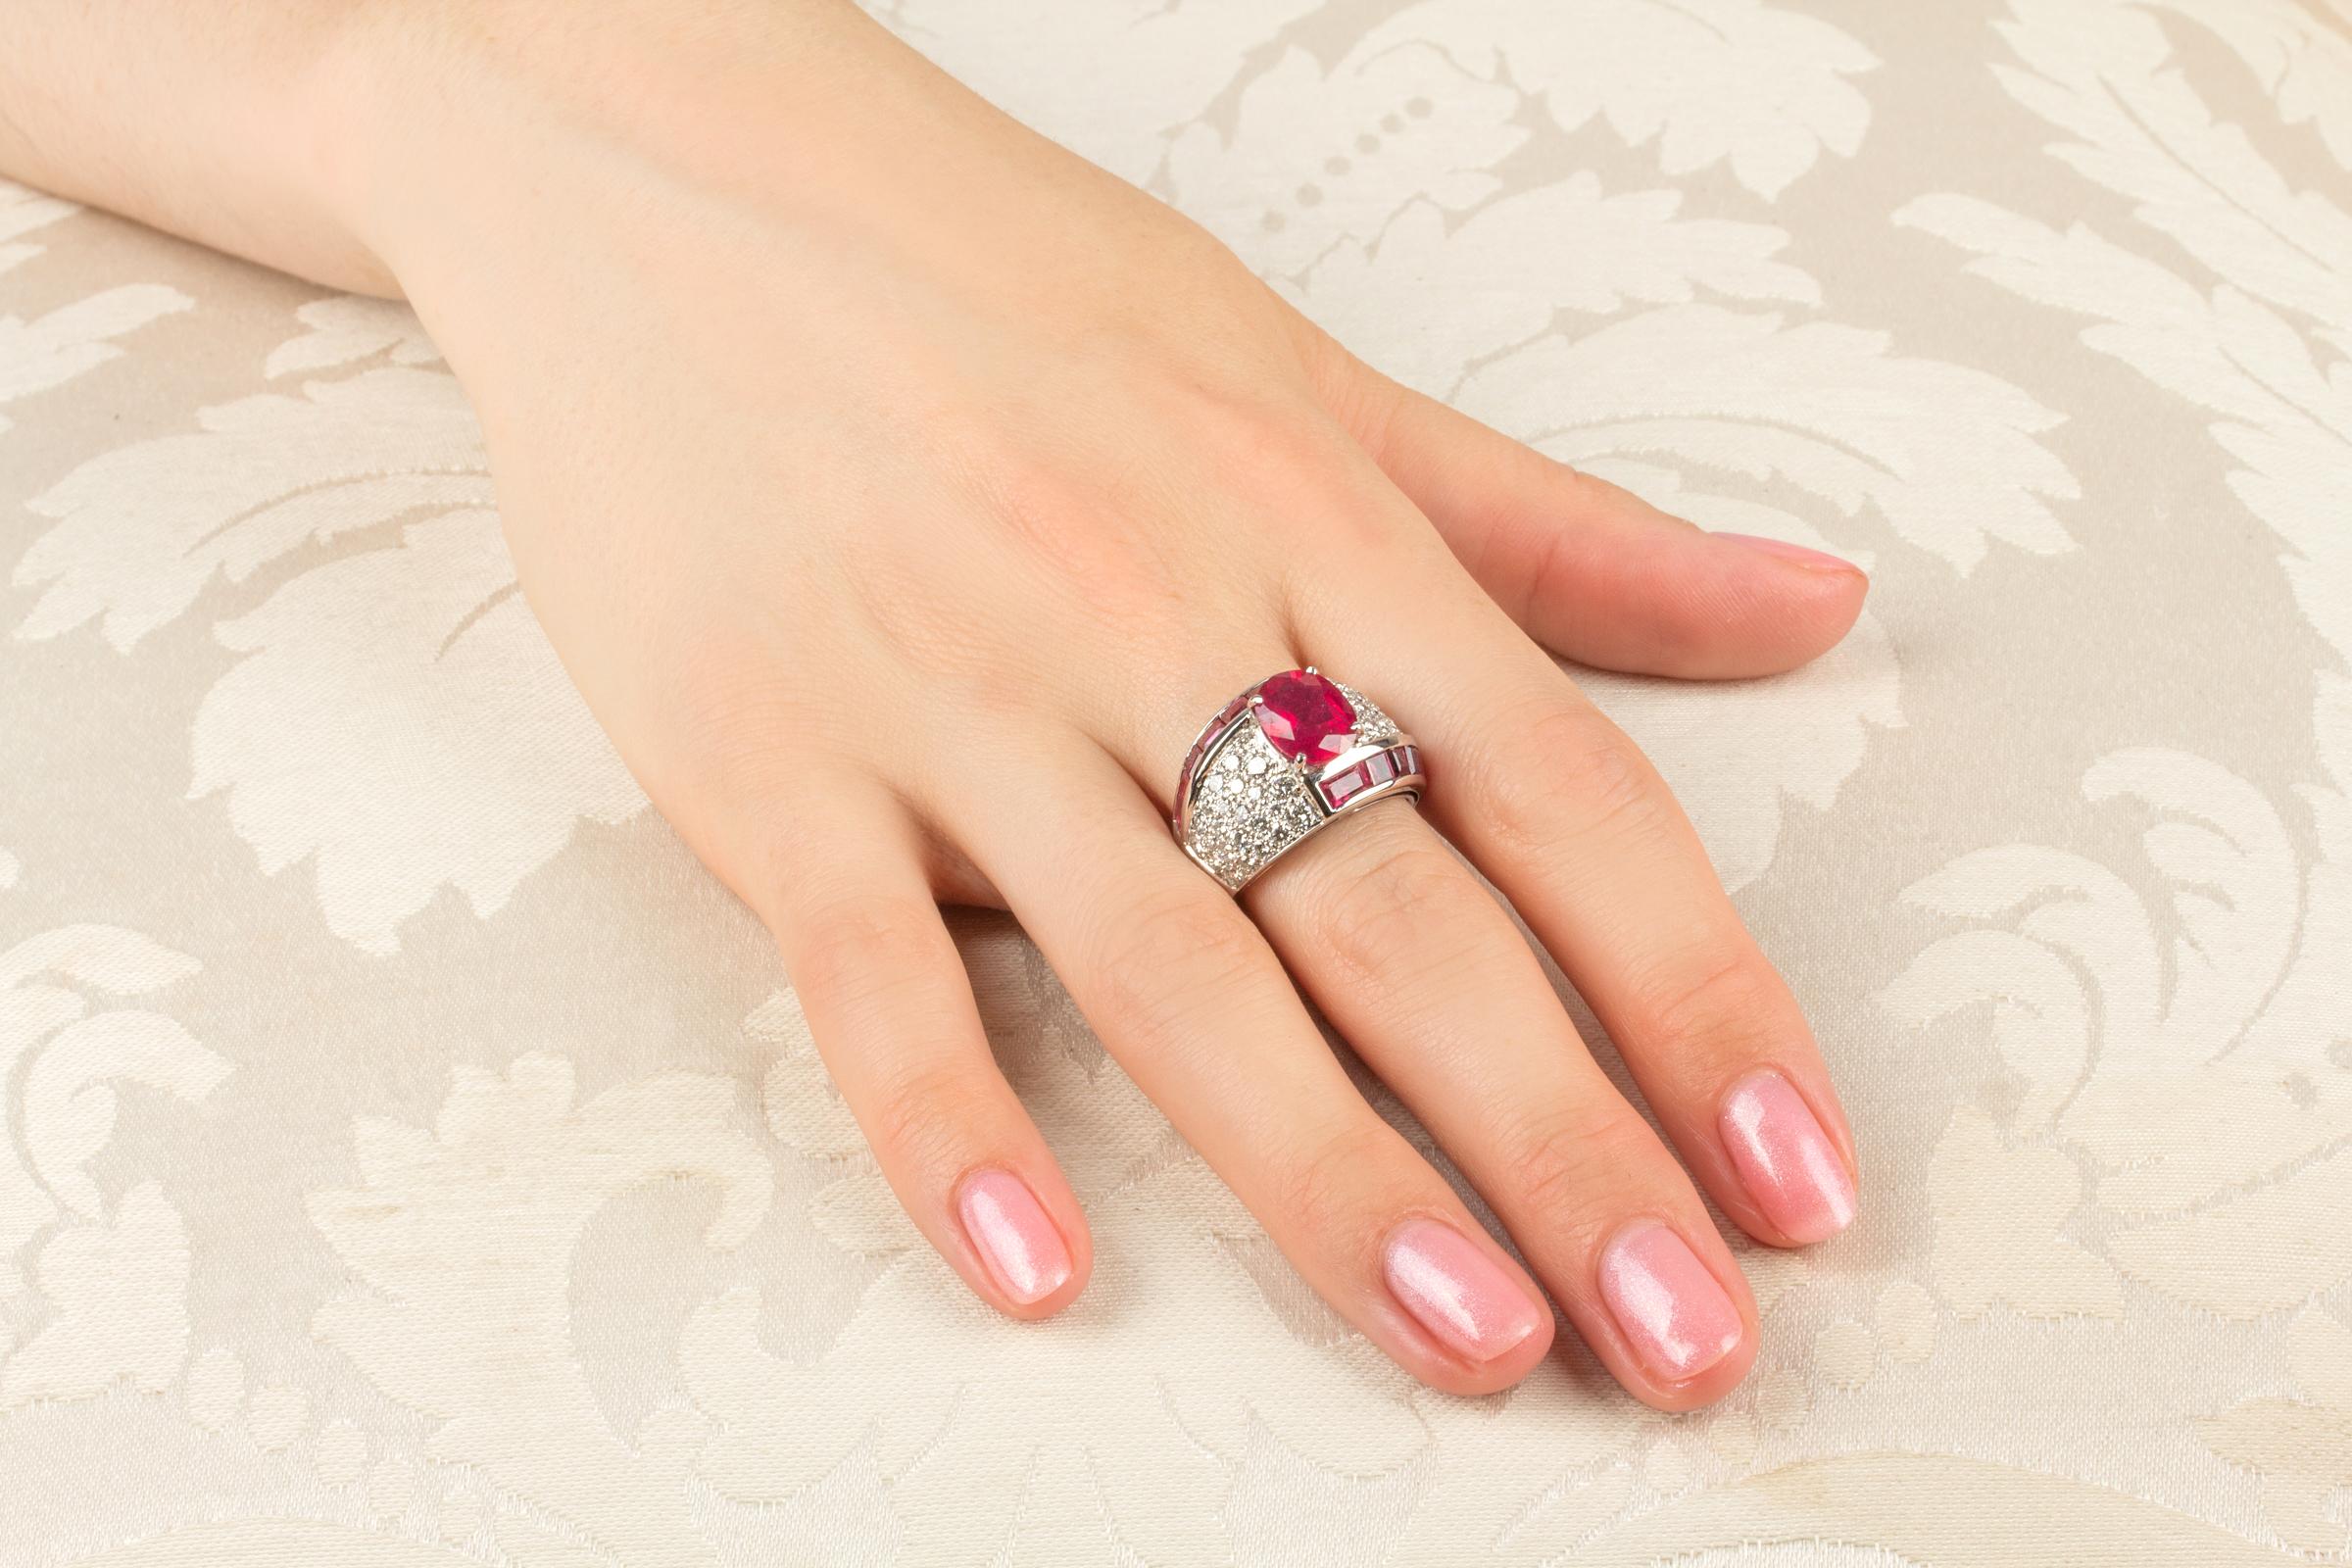 The ruby and diamond cocktail ring features an oval cut faceted  ruby weighing approximately 3 carats. The center stone is flanked by 2 ribbons set with custom cut channel set rubies for a total weight of 2.50 carats. The design is complete with